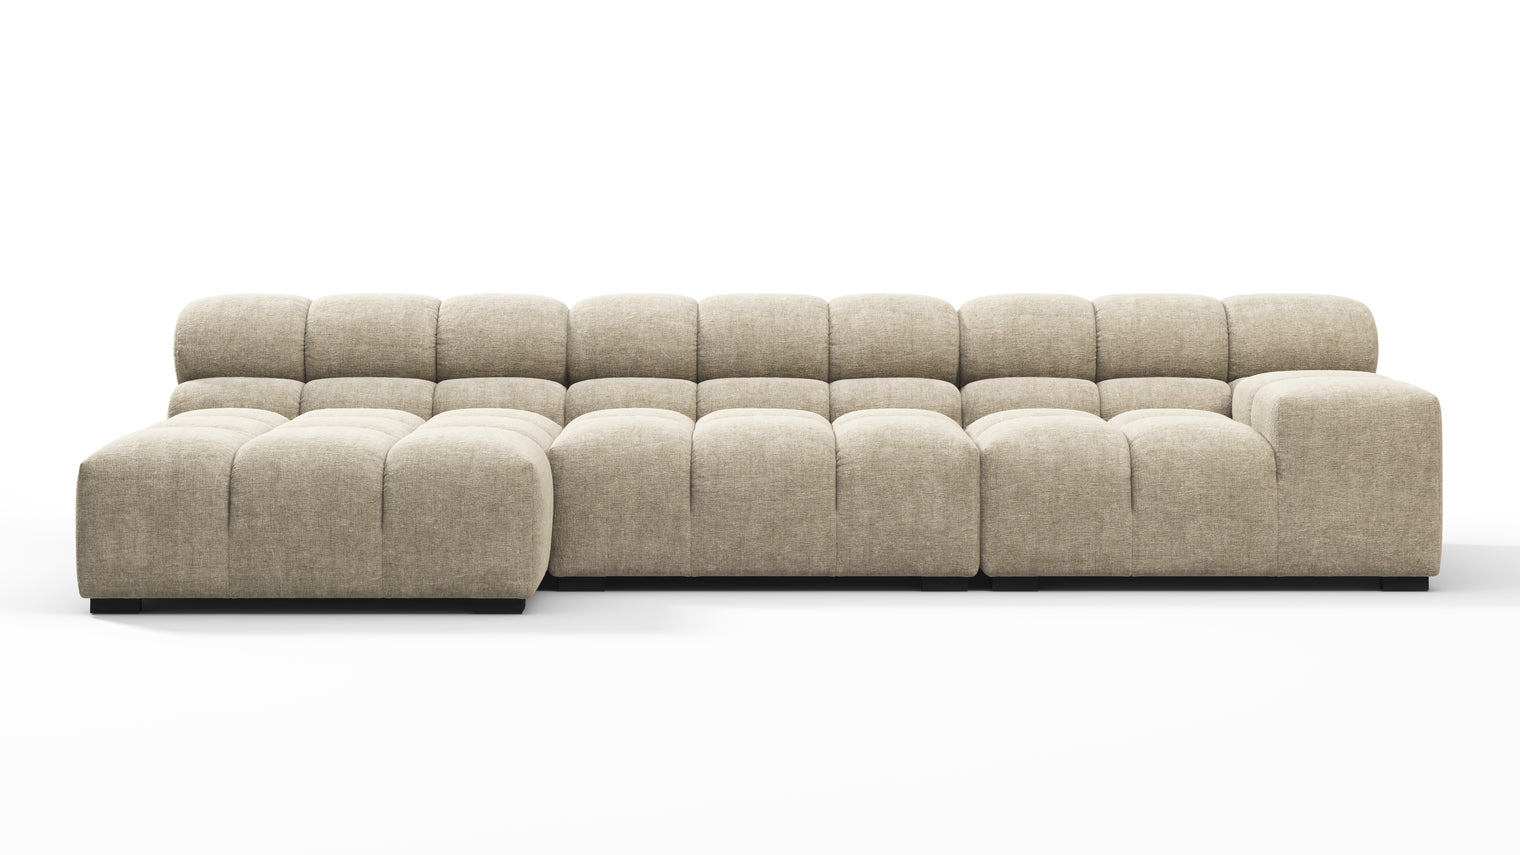 MODULAR MASTERPIECE | A modern take on 70s design, this cloud-like sectional is all about leisurely lounging. Its relaxed, playful aesthetic is adored around the world.
